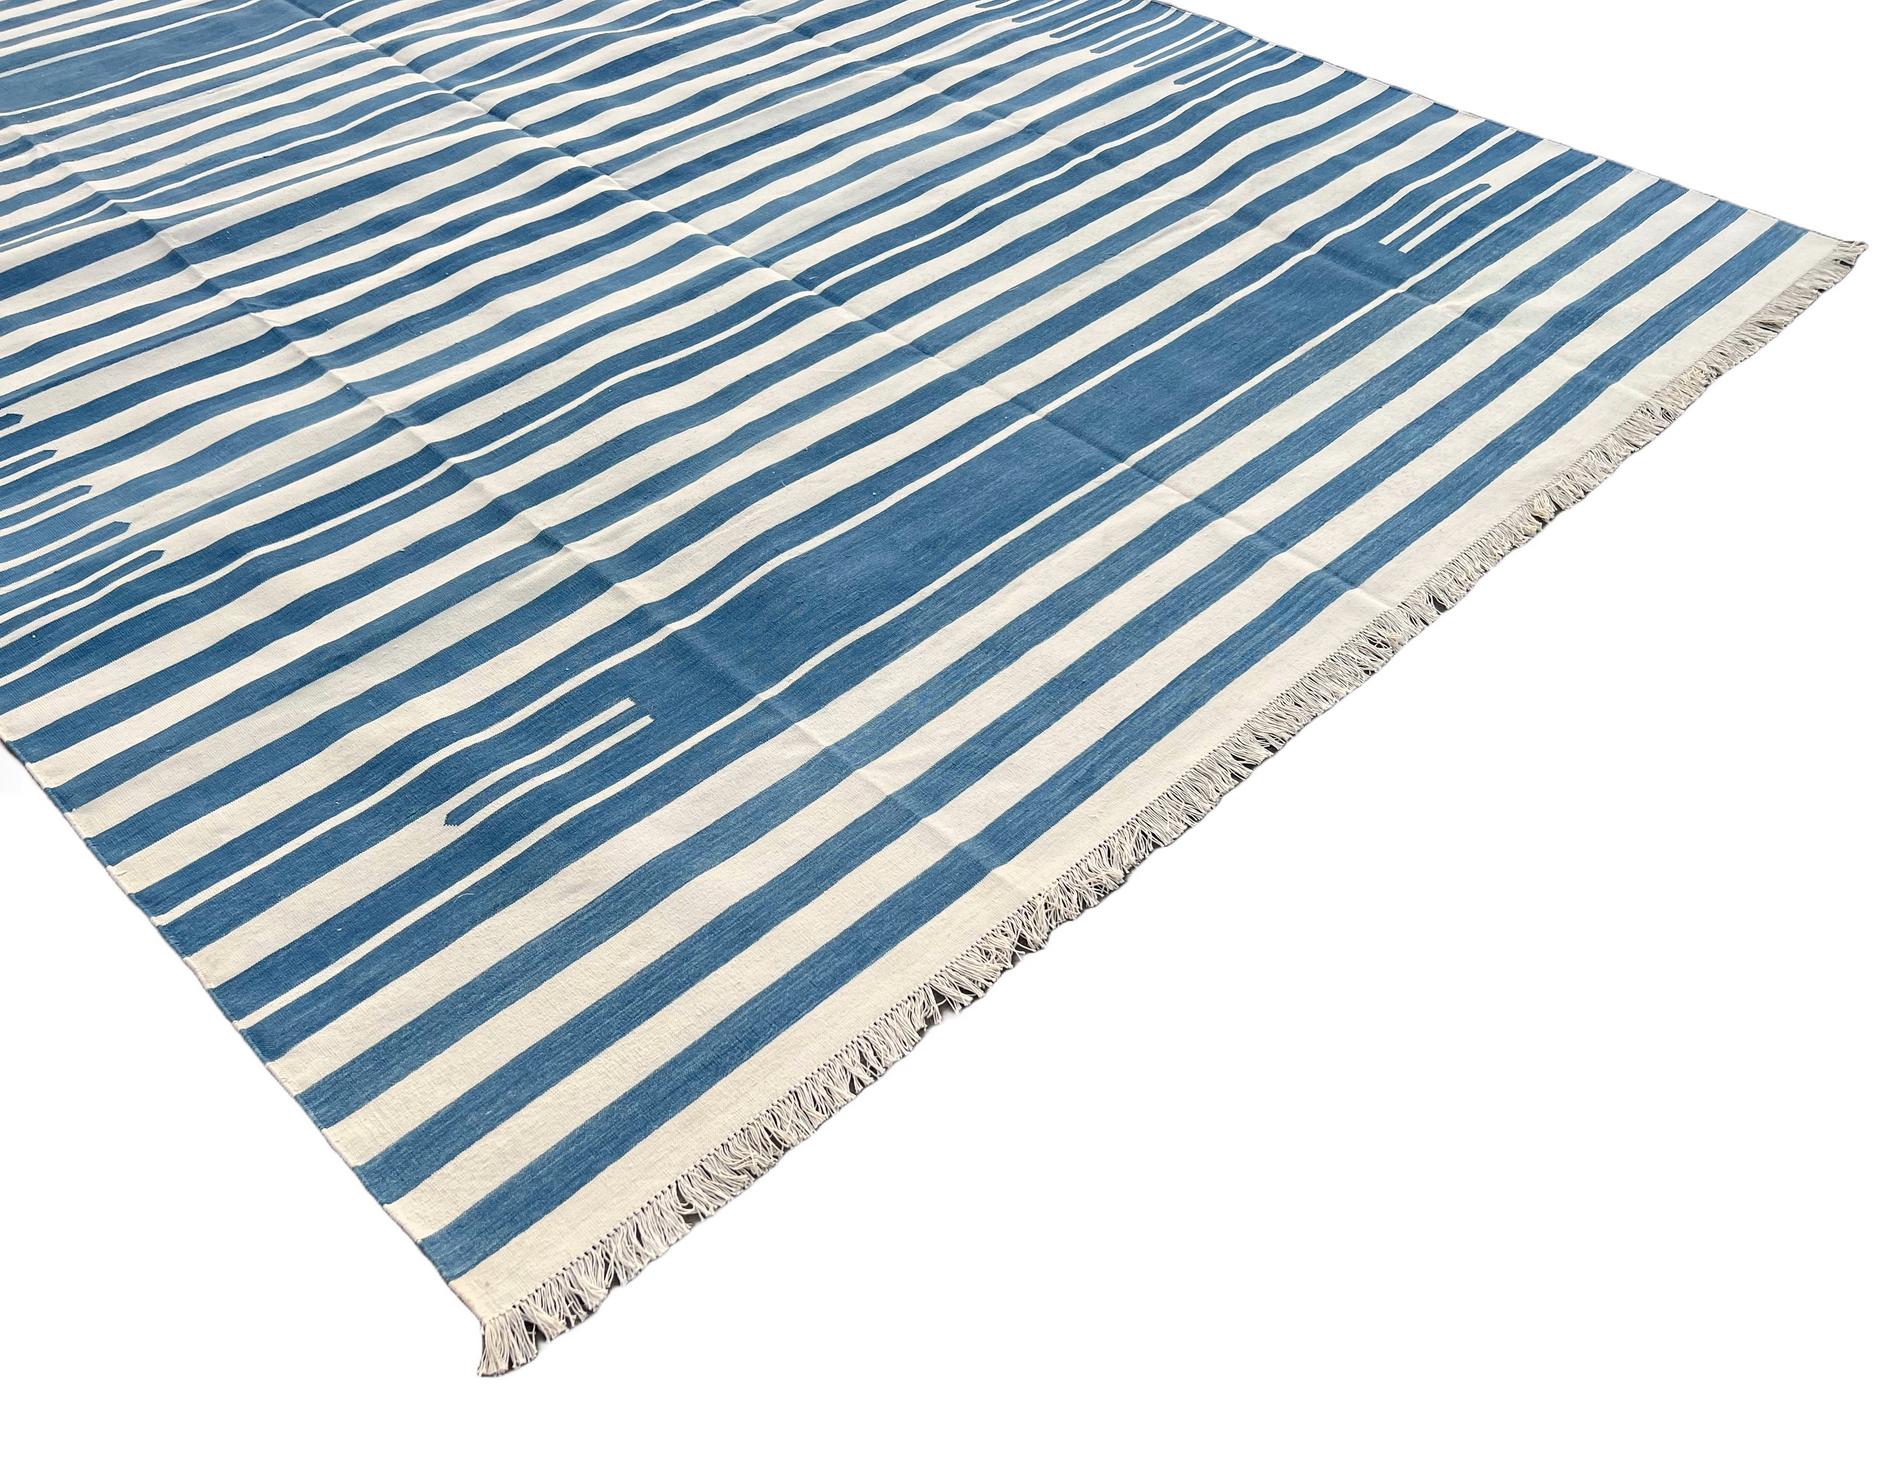 Hand-Woven Handmade Cotton Area Flat Weave Rug, 8x10 Blue And White Striped Indian Dhurrie For Sale